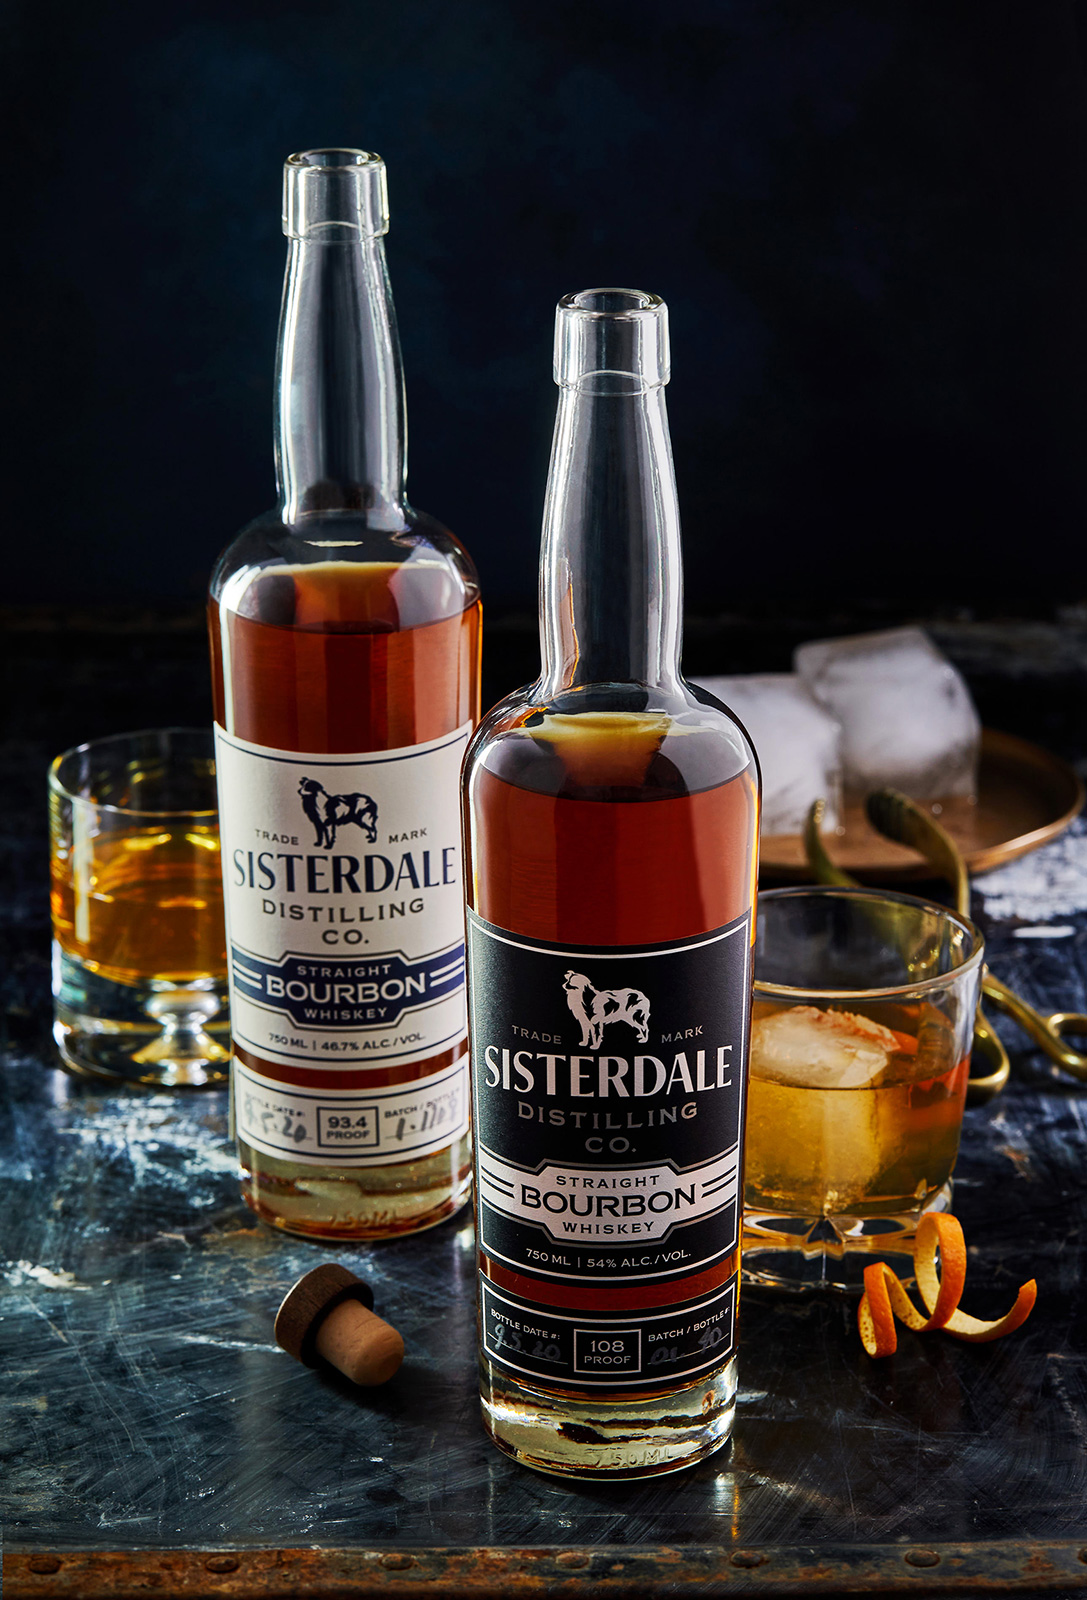 Sisterdale Distilling Co bourbon package design by beau morrow for left hand design in austin texas